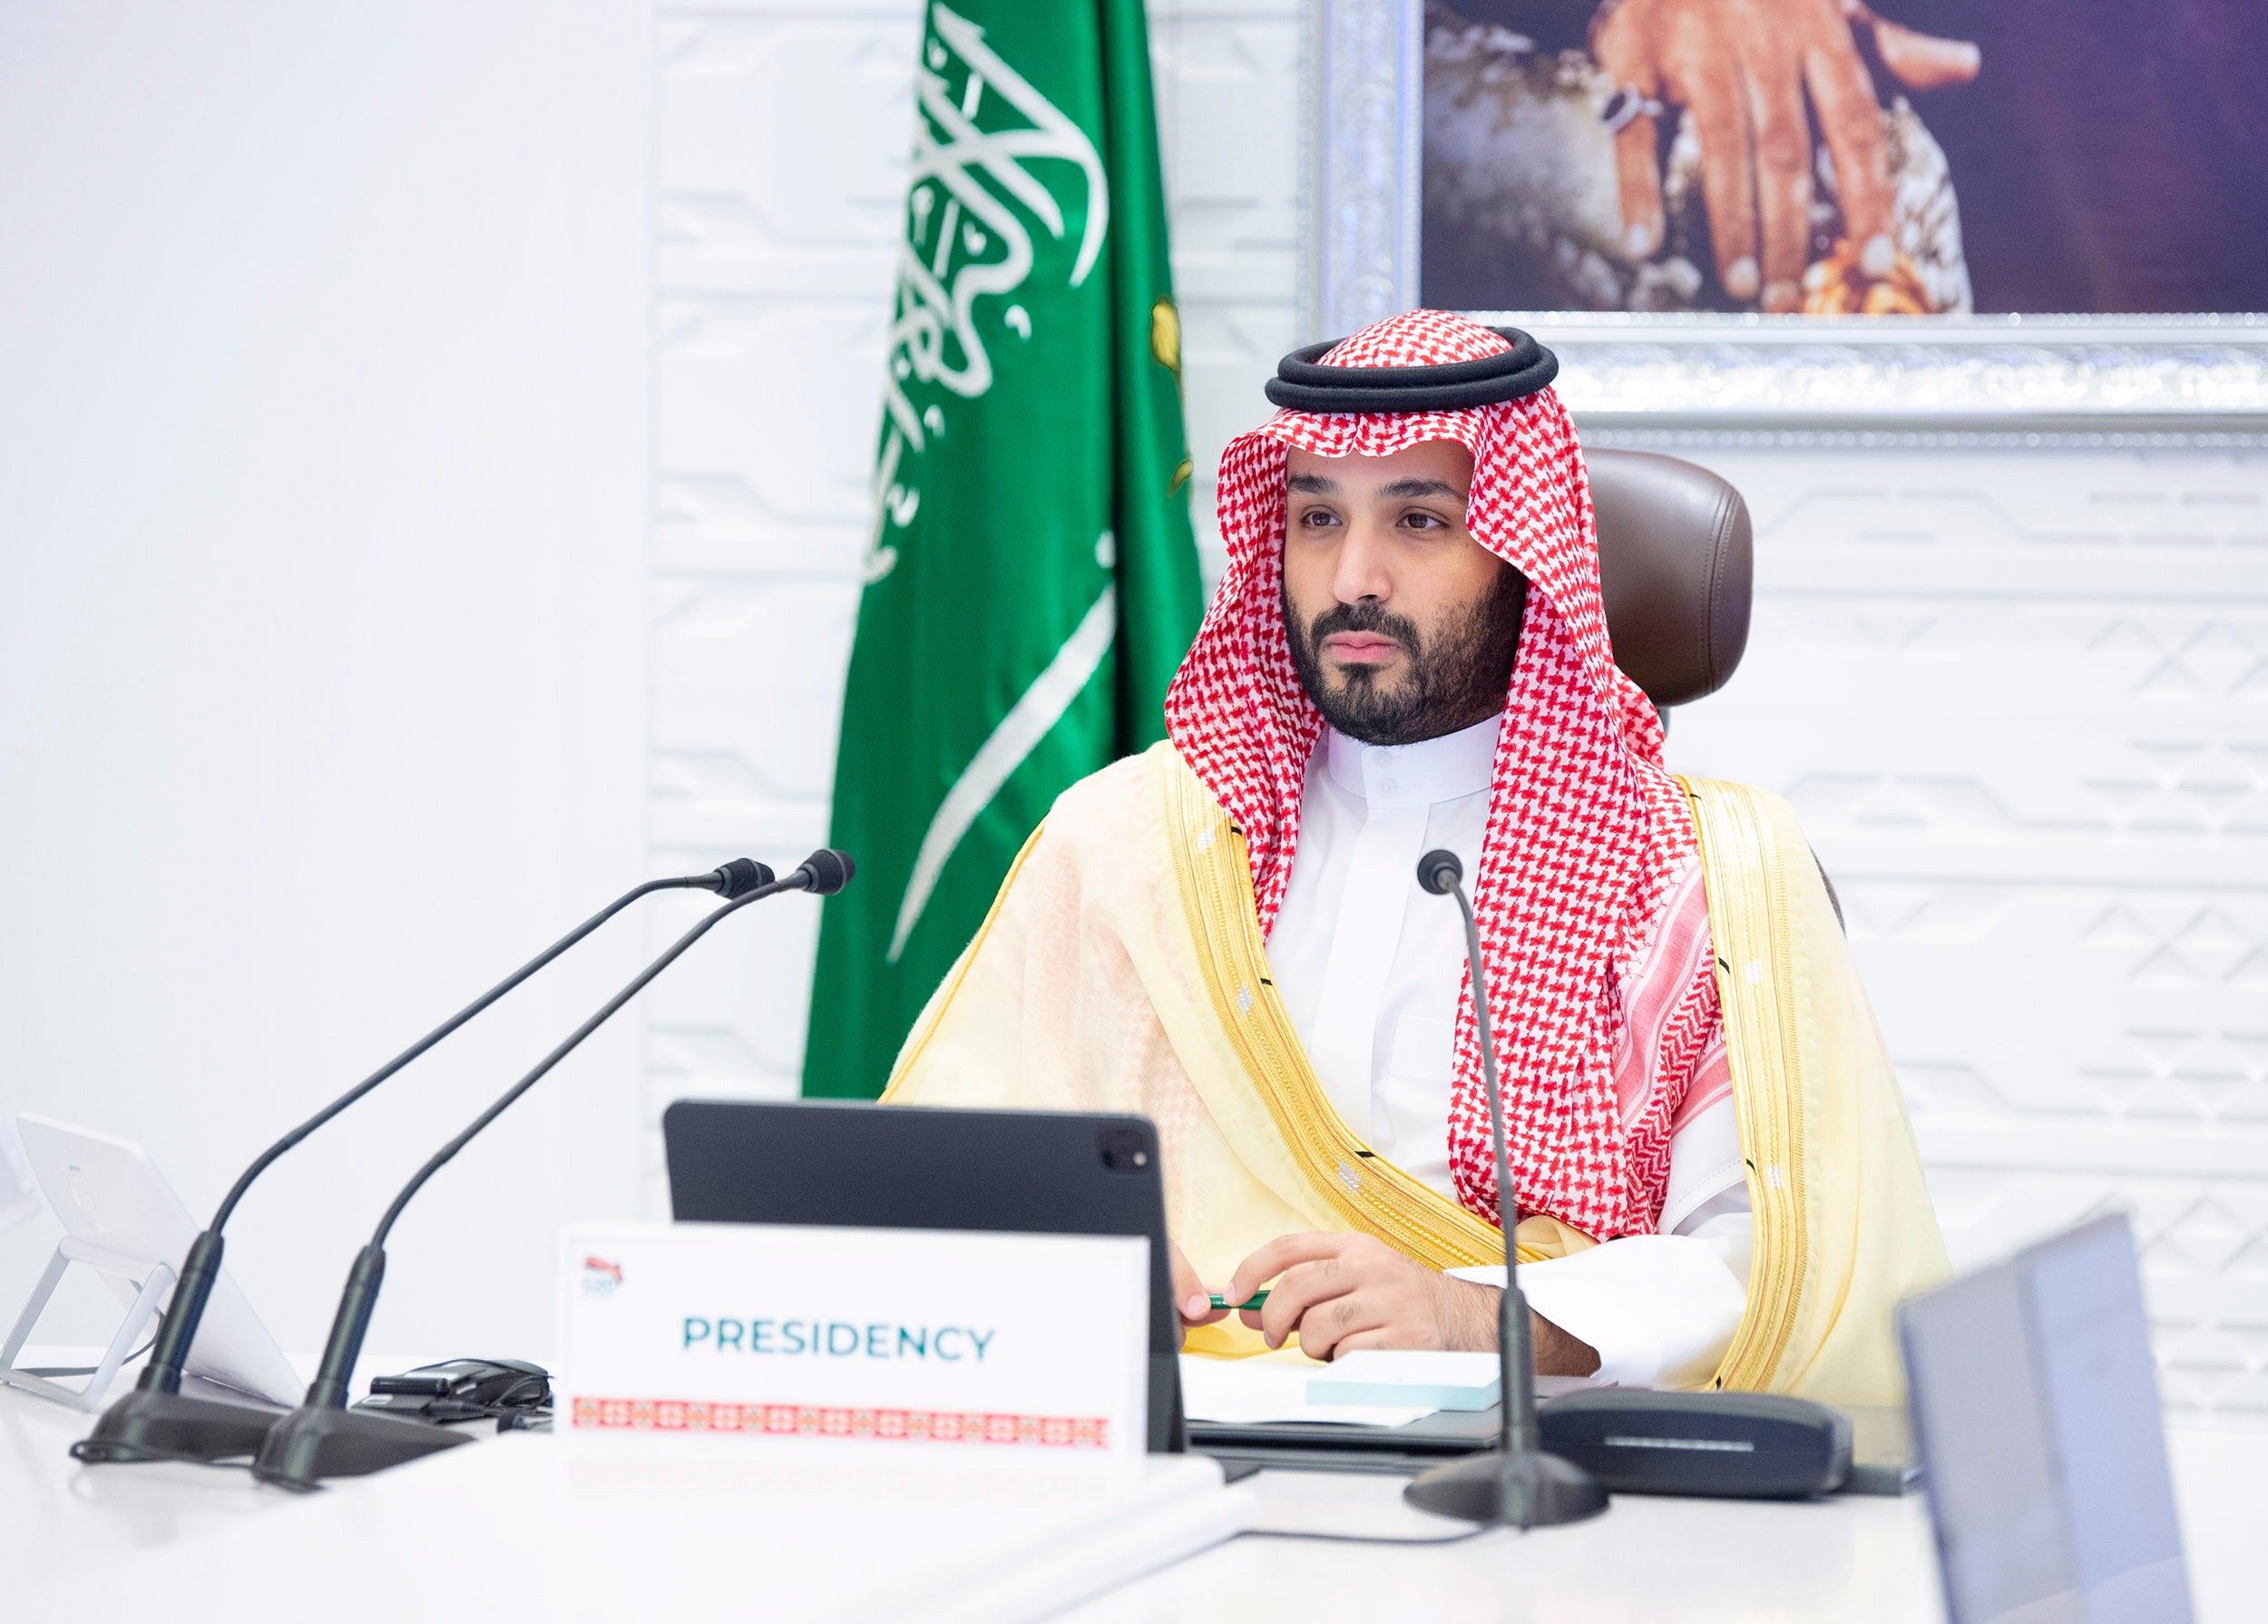 Saudi Arabia’s Crown Prince Mohammed bin Salman chaired the final session of the second day of the G20 Riyadh Summit